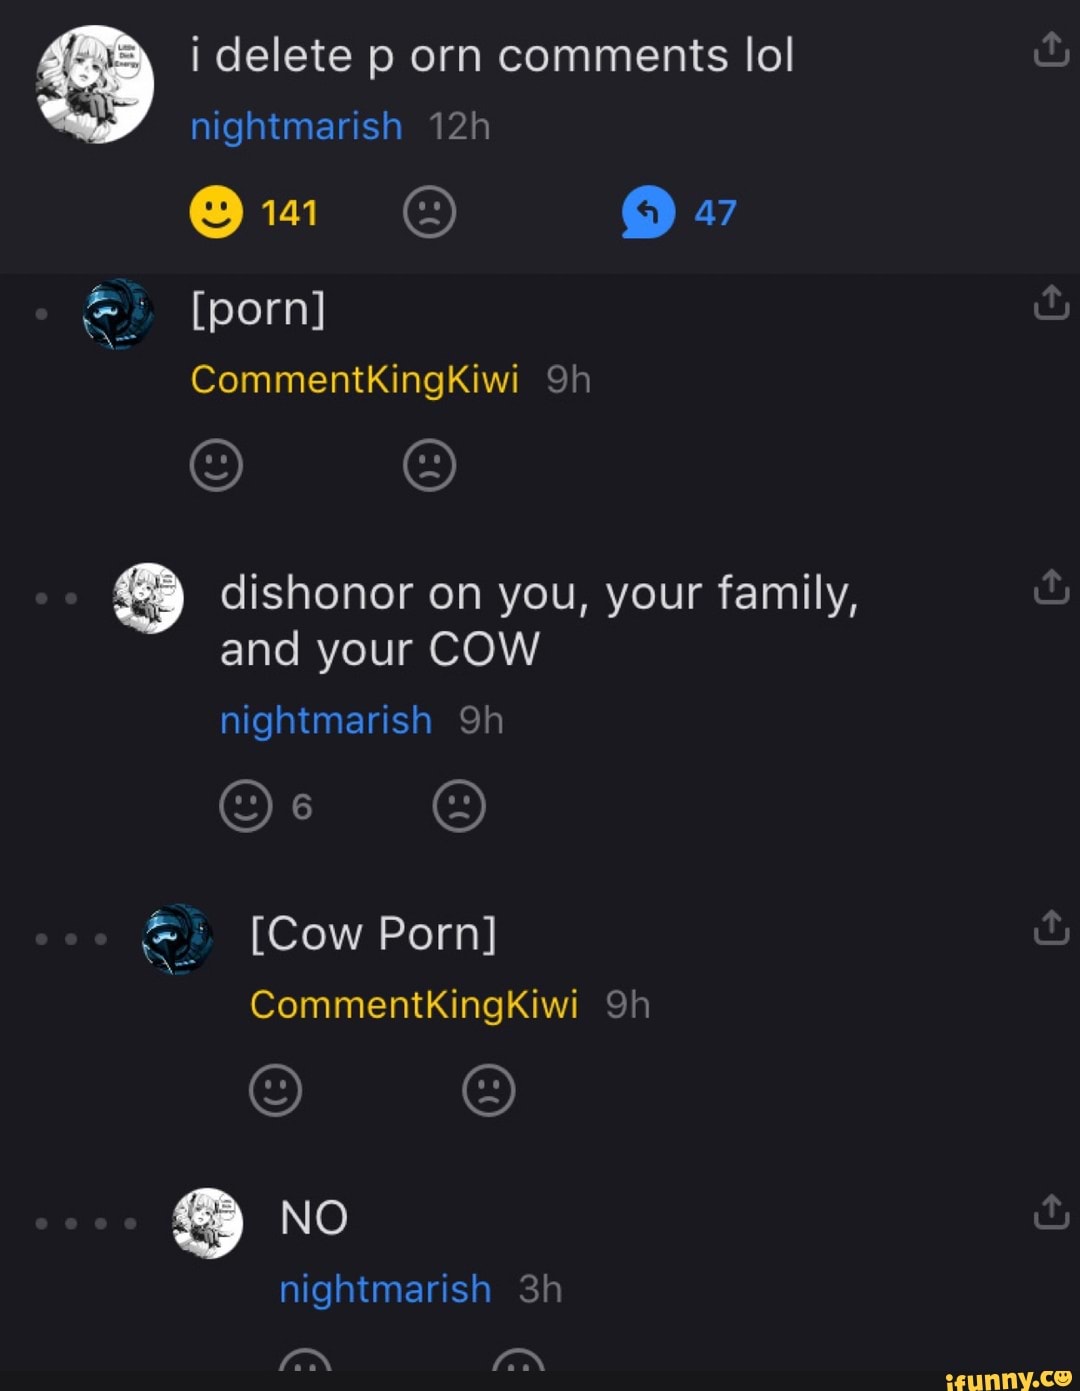 Nightmarish Porn - & i delete p nightmarish orn comments lol nightmarish eu 47 [porn]  CommentKingKiwi dishonor on you, your family, and your COW nightmarish Oh  Os [Cow Porn] CommentKingKiwi @ NO nightmarish - iFunny :)